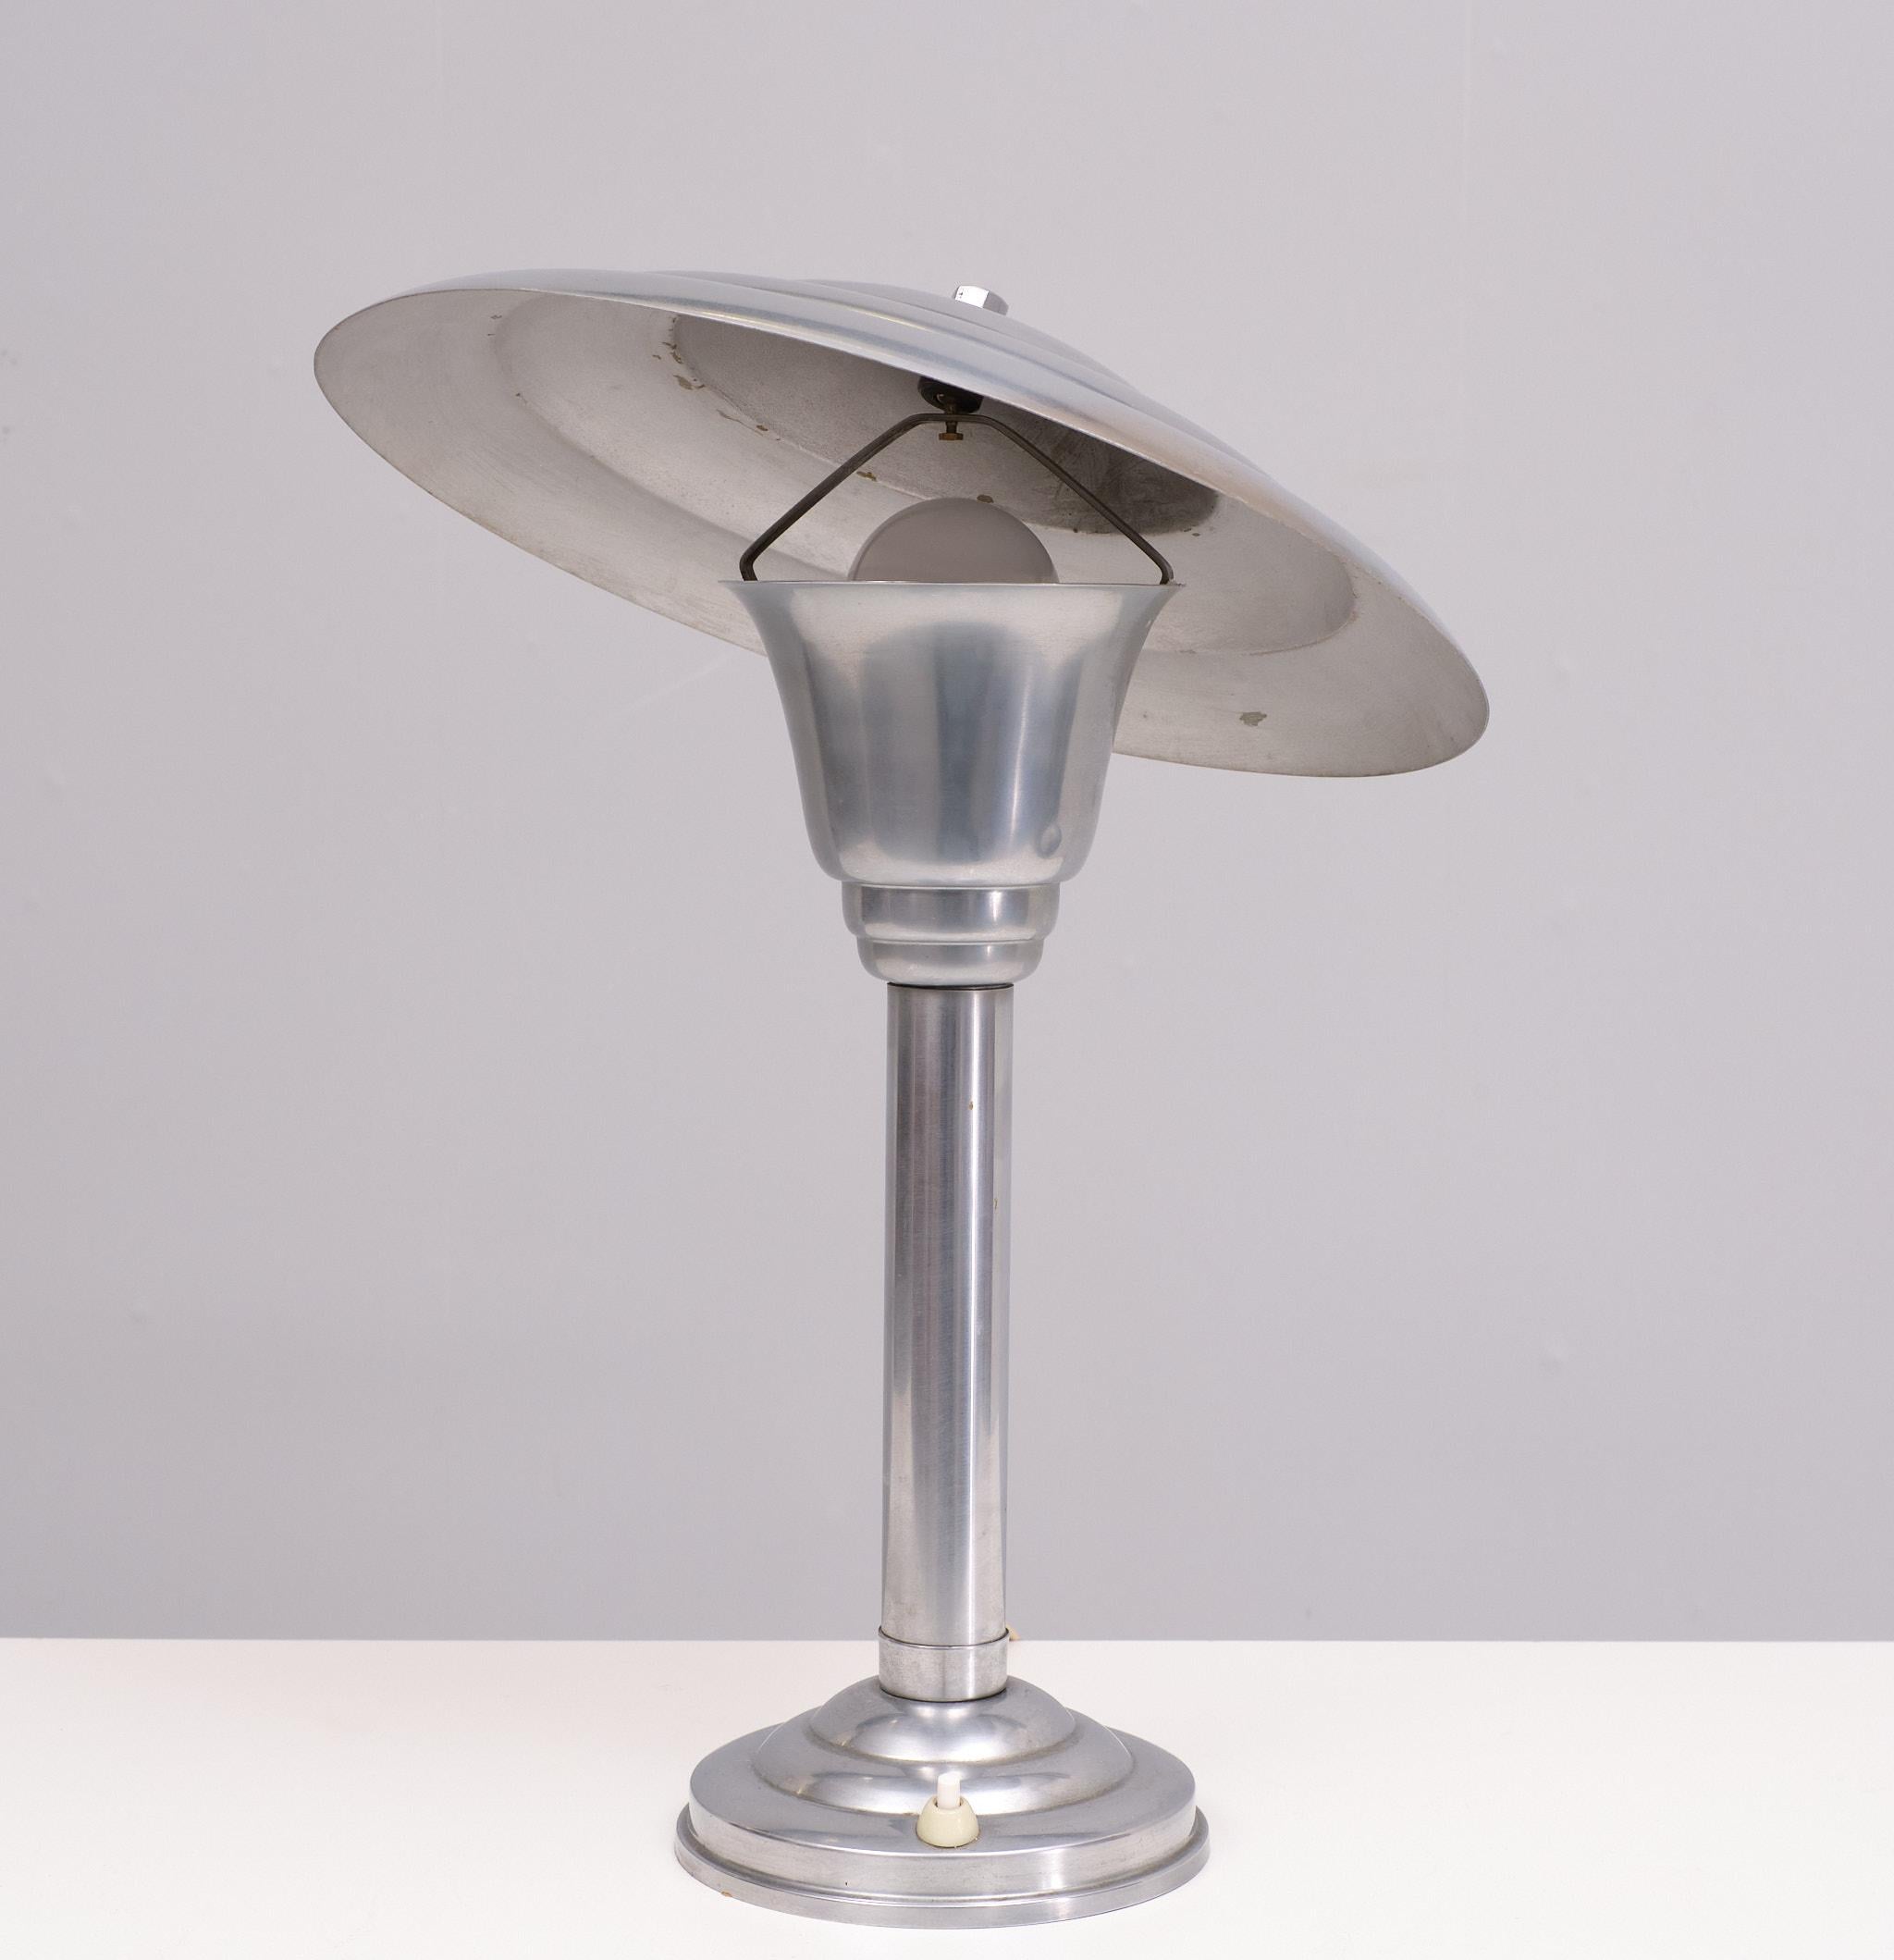 Original Bauhaus Nickel table lamp  1920s Germany  In Good Condition For Sale In Den Haag, NL